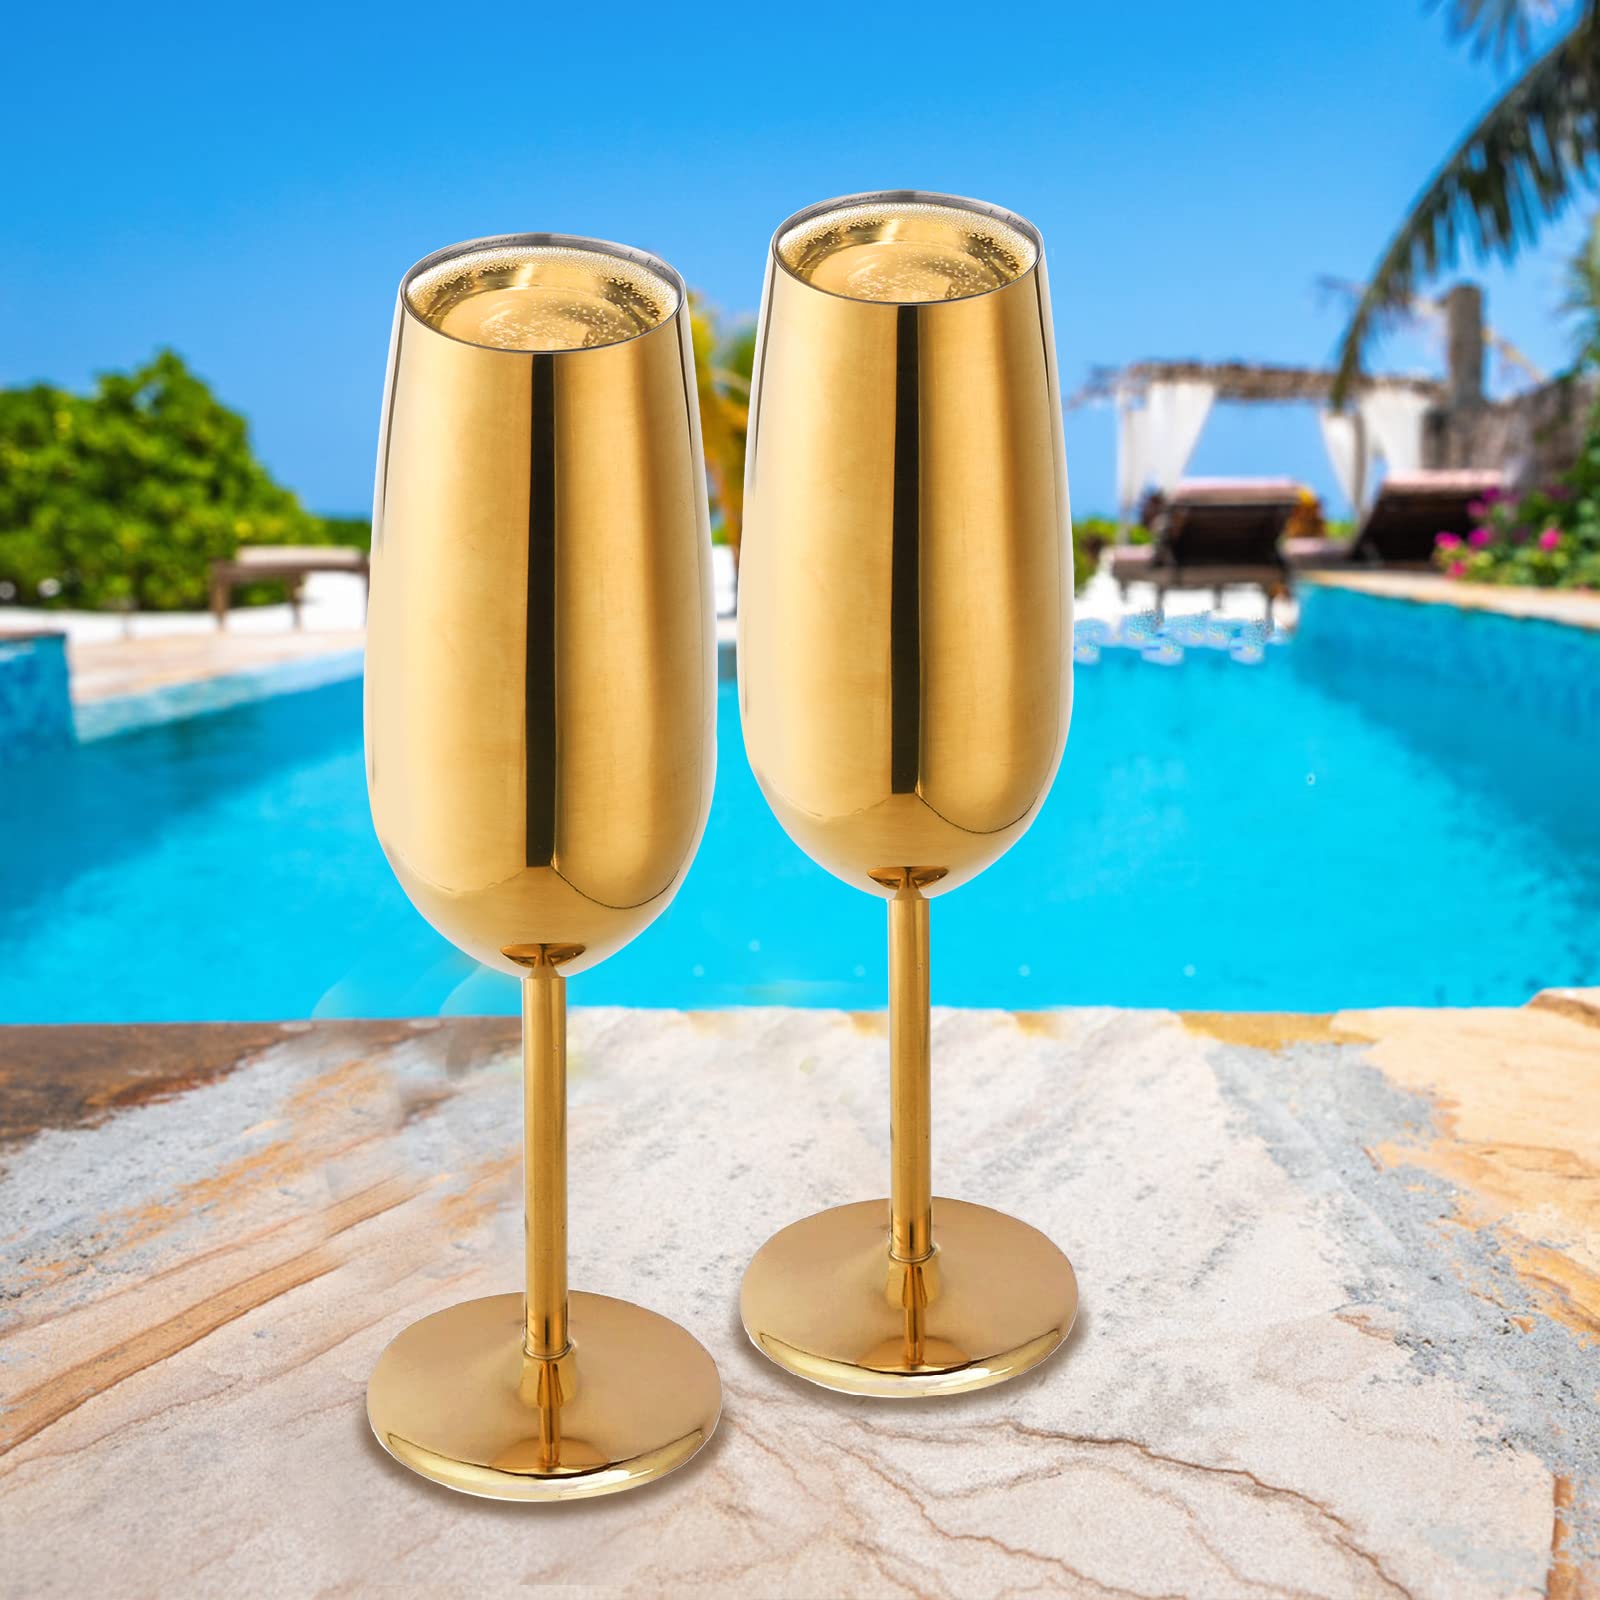 DEAYOU 2-Pack 18/10 Stainless Steel Champagne Glasses, Gold Metal Wine Goblet Cup for Cheers, Wedding, Party